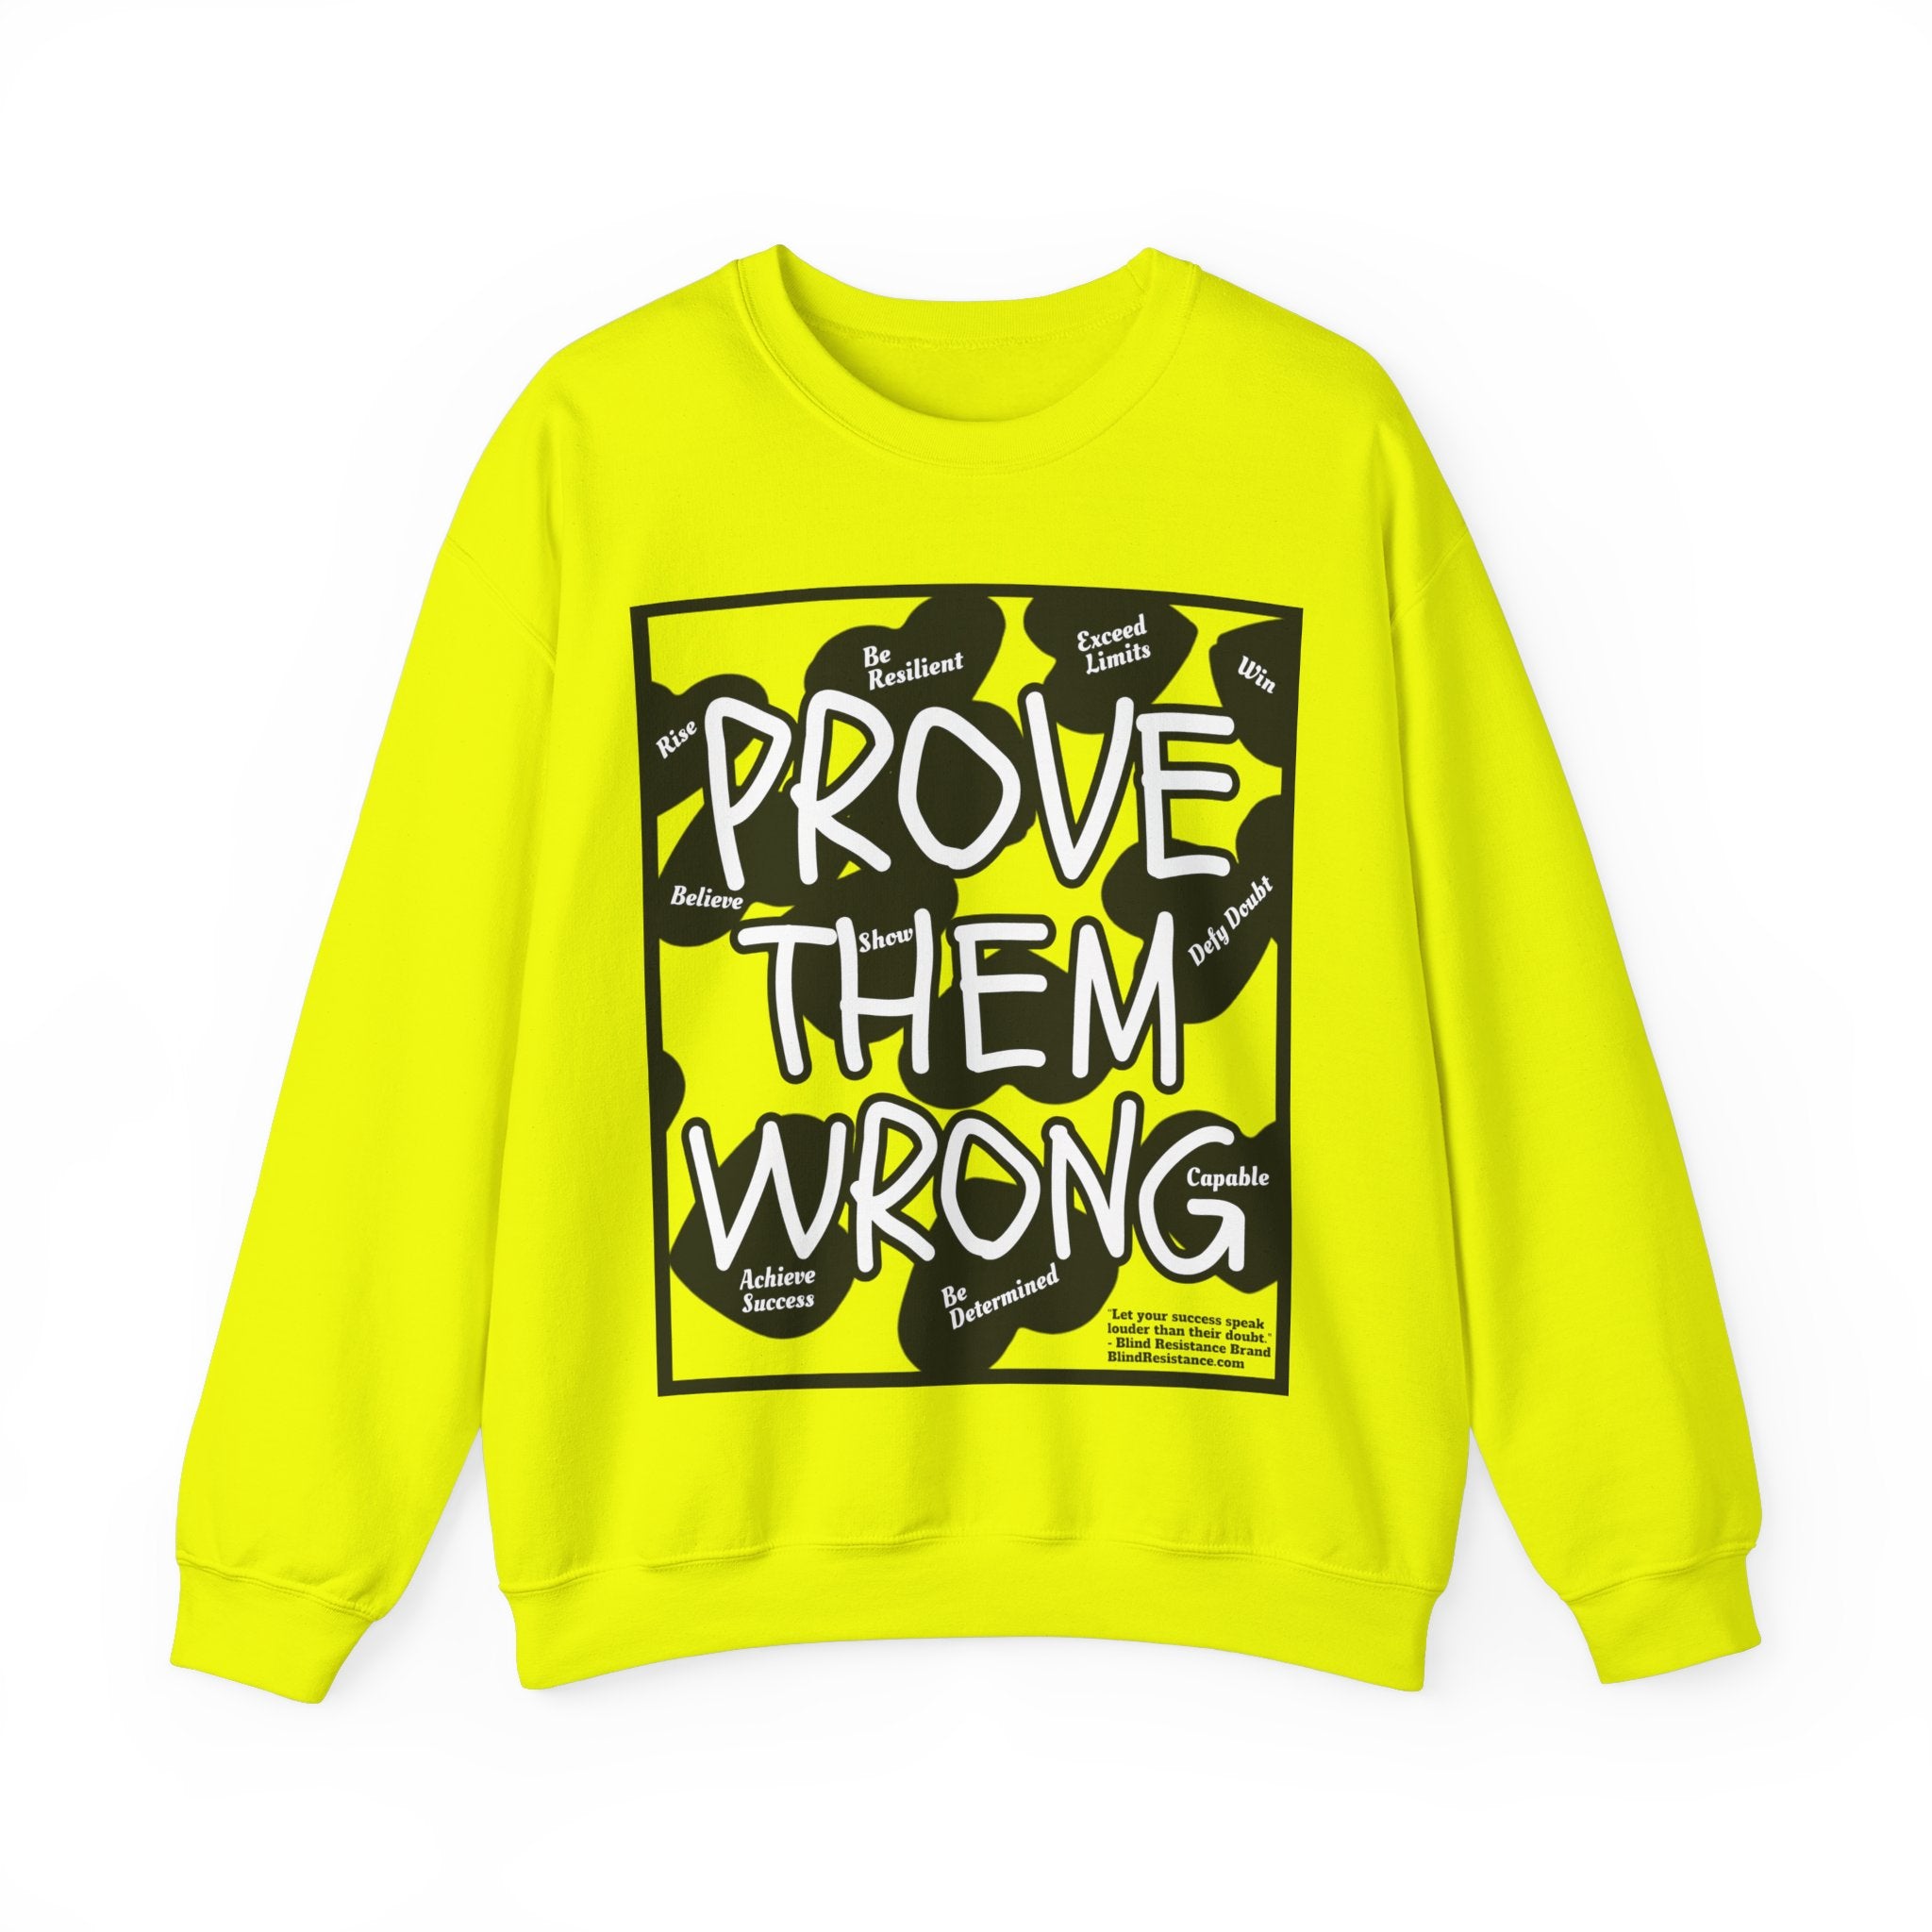 Prove Them Wrong Inspiration Sweatshirt (Safety Colors)